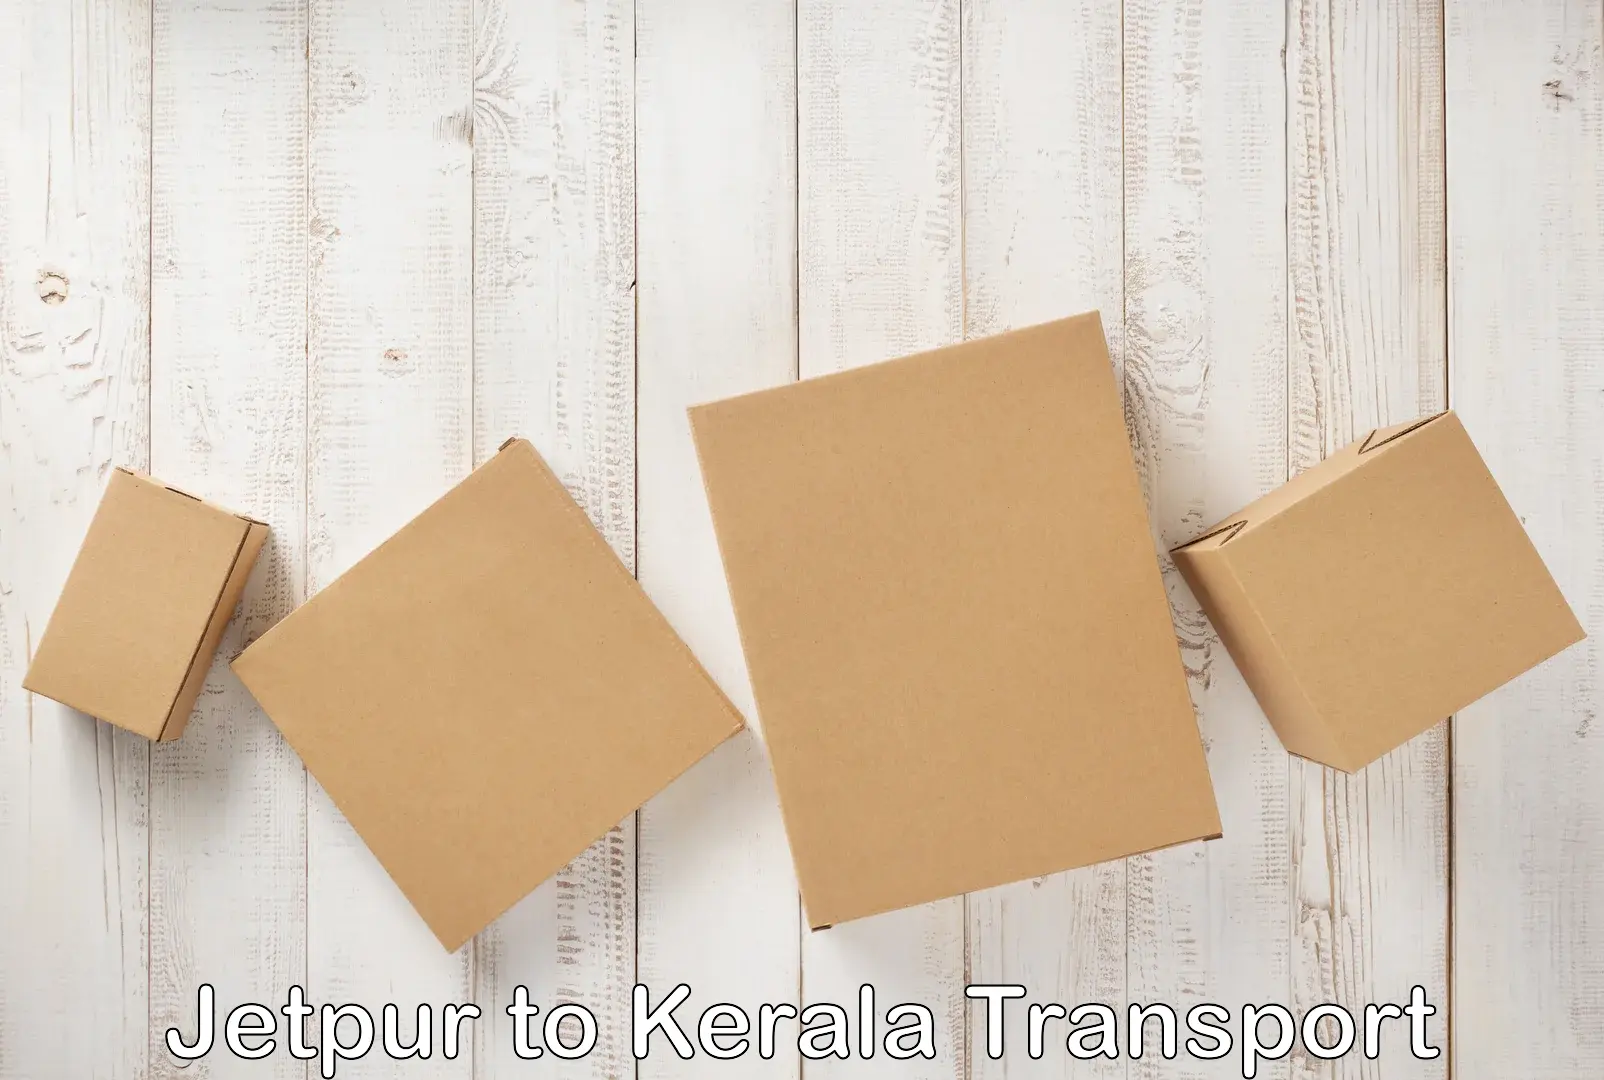 Commercial transport service Jetpur to Kerala